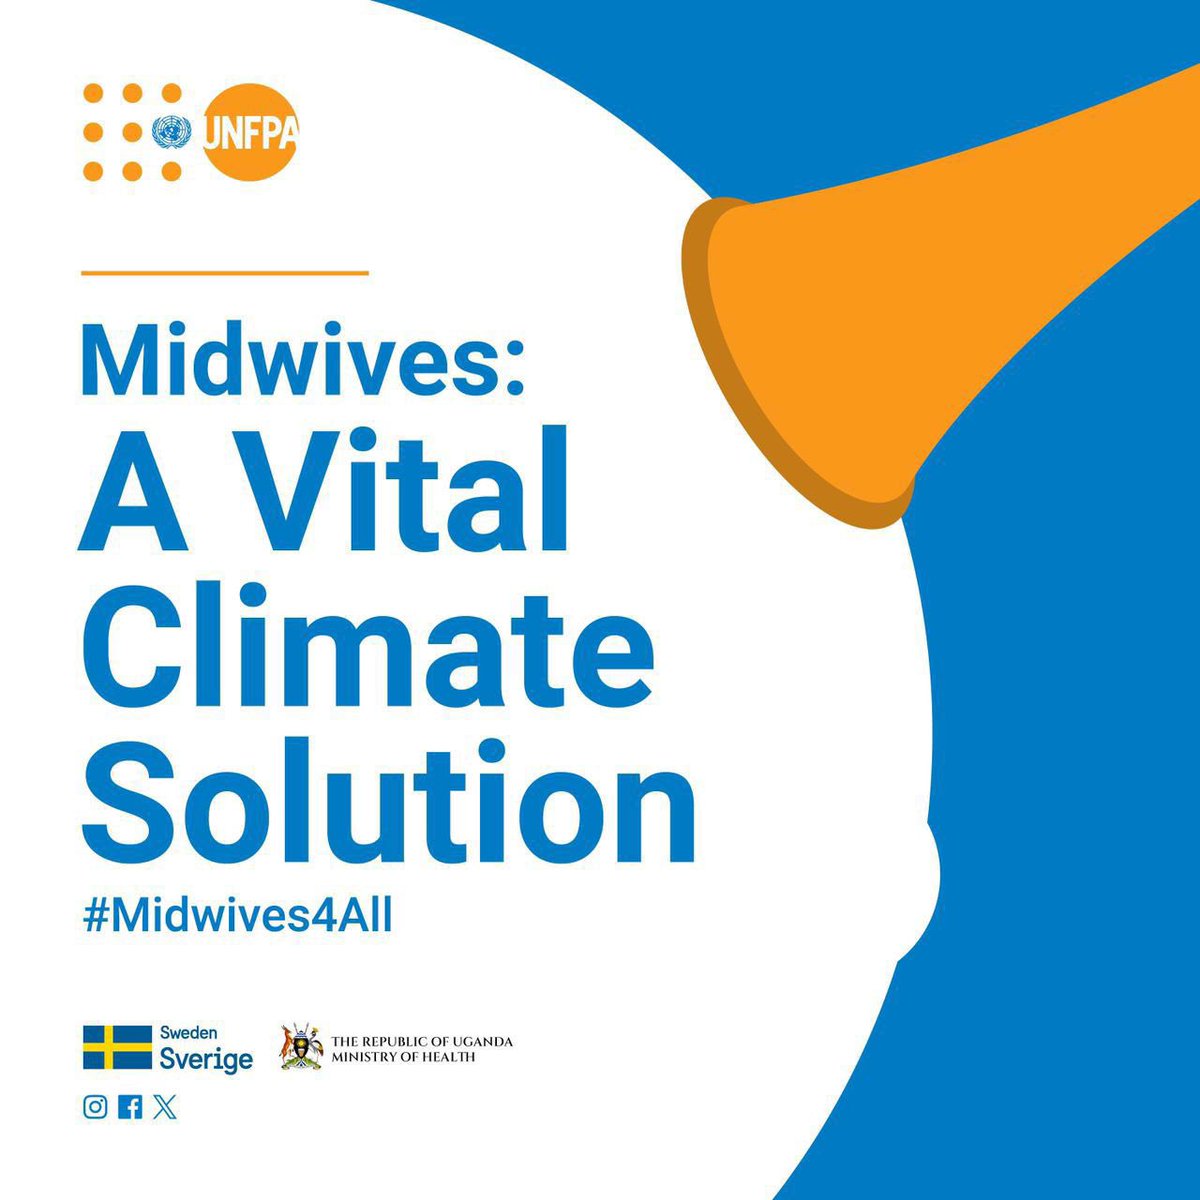 Tomorrow, on the 5th, the world celebrates International Day of the Midwife under a theme: ‘Midwives: A vital climate solution.’ Midwives do more than deliver babies; we champion sexual & reproductive health, offering services that reduce women’s vulnerability to climate crisis.